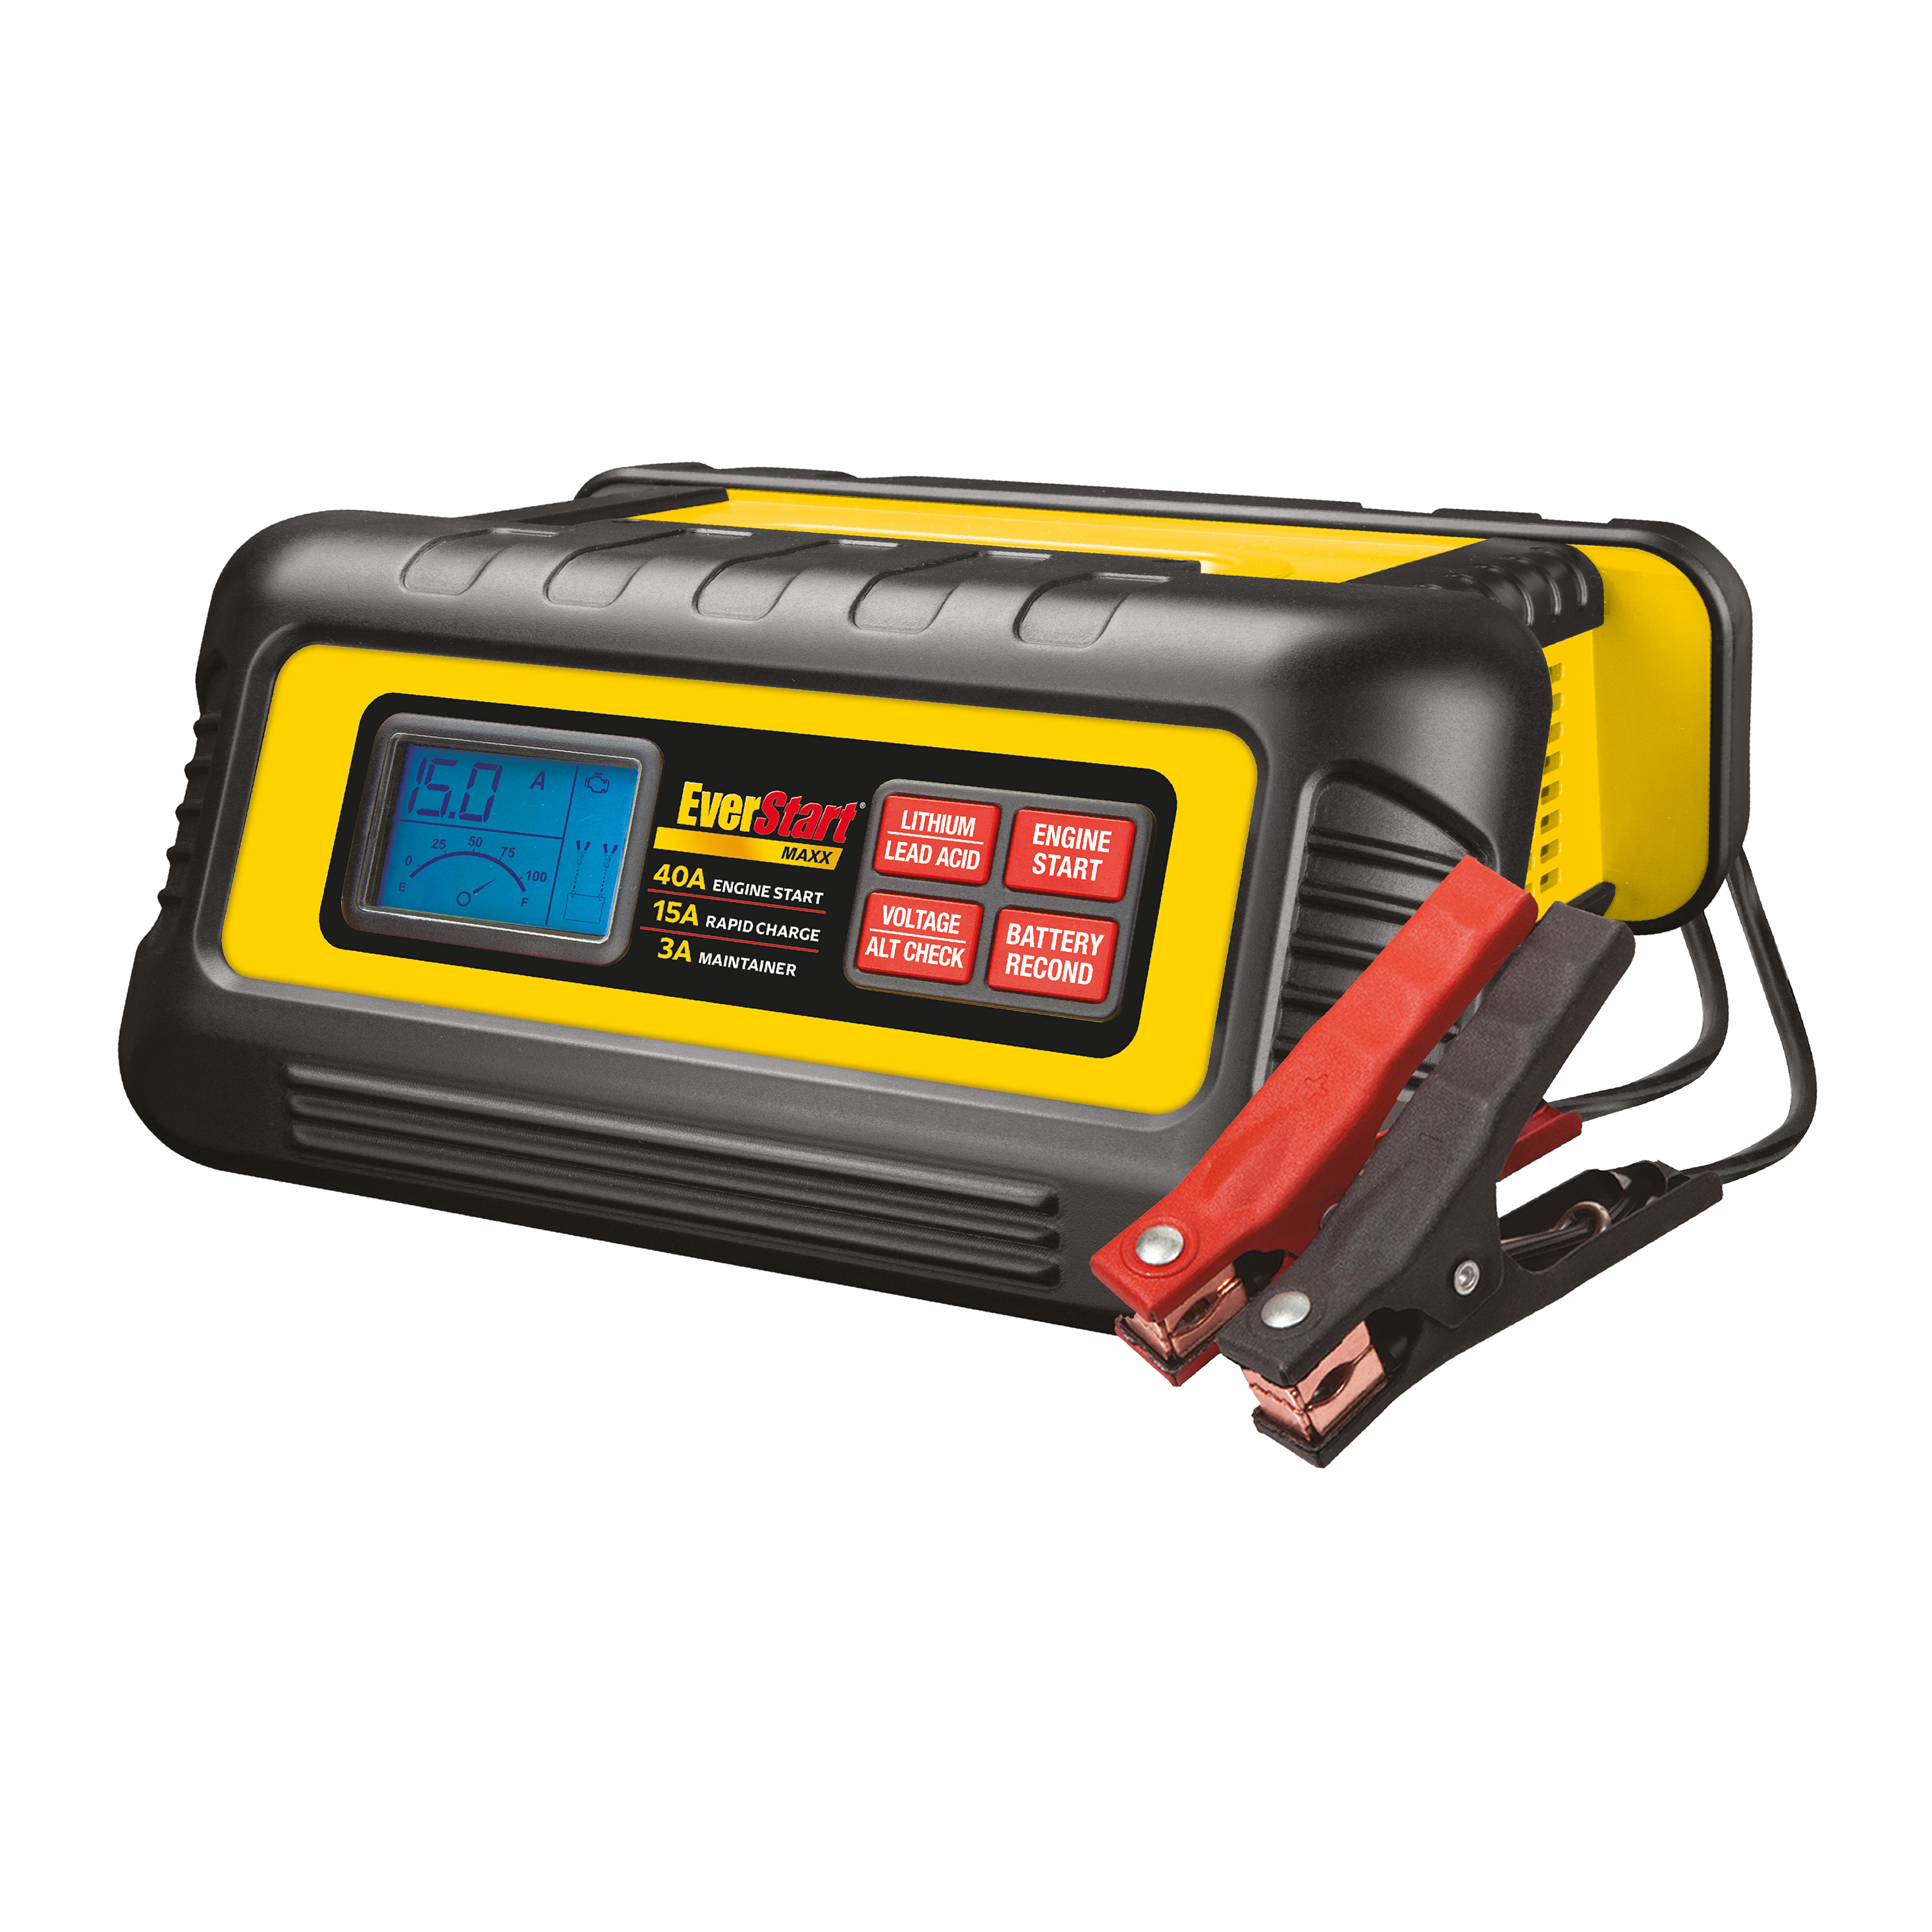 EverStart Maxx 15 Amp Battery Charger and Maintainer with 40 Amp Engine Start (BC40BE) - image 1 of 7